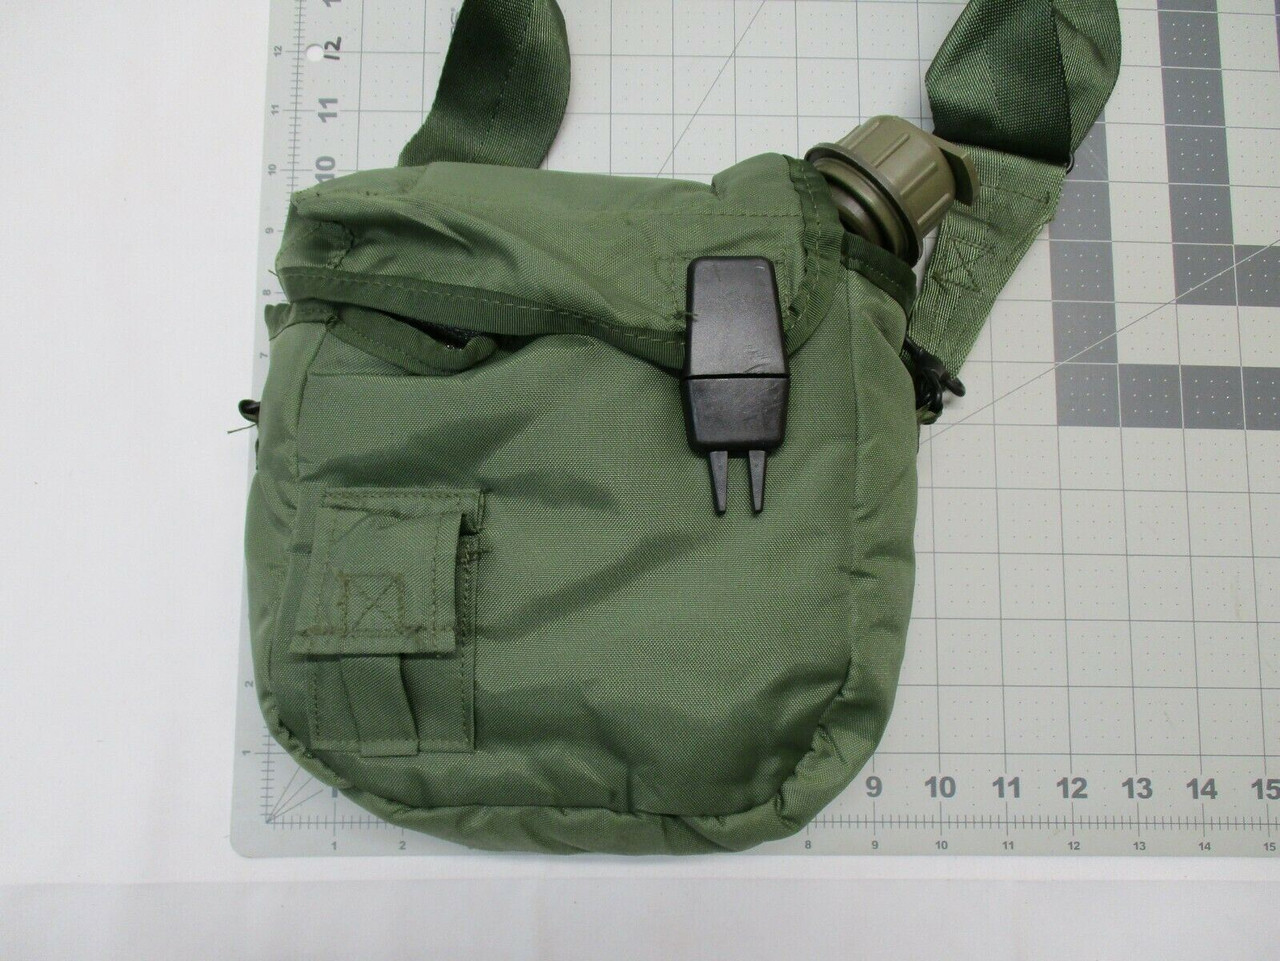 USGI 2 QUART CANTEEN w. POUCH OD GREEN ALICE CLIPS MILITARY WATER CARRIER